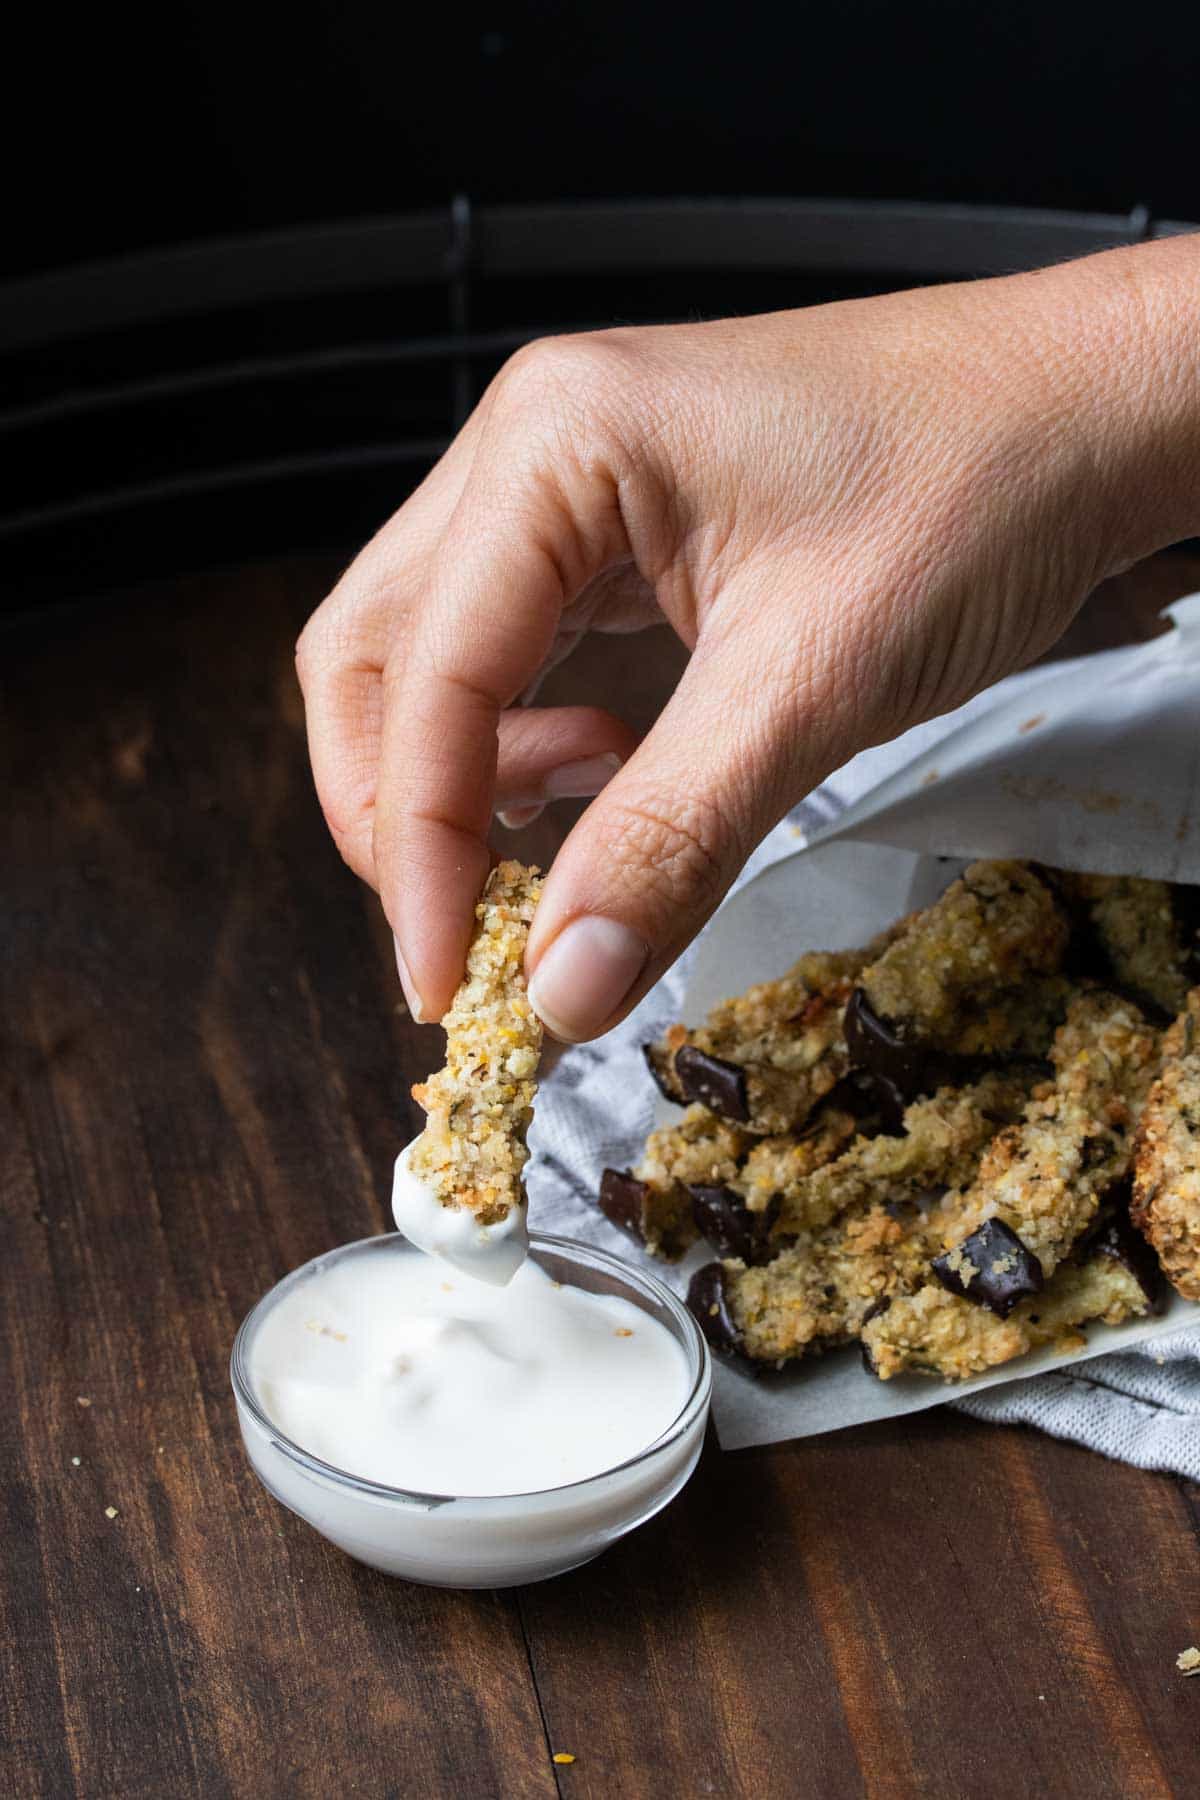 Hand dipping an eggplant fry into a white sauce.